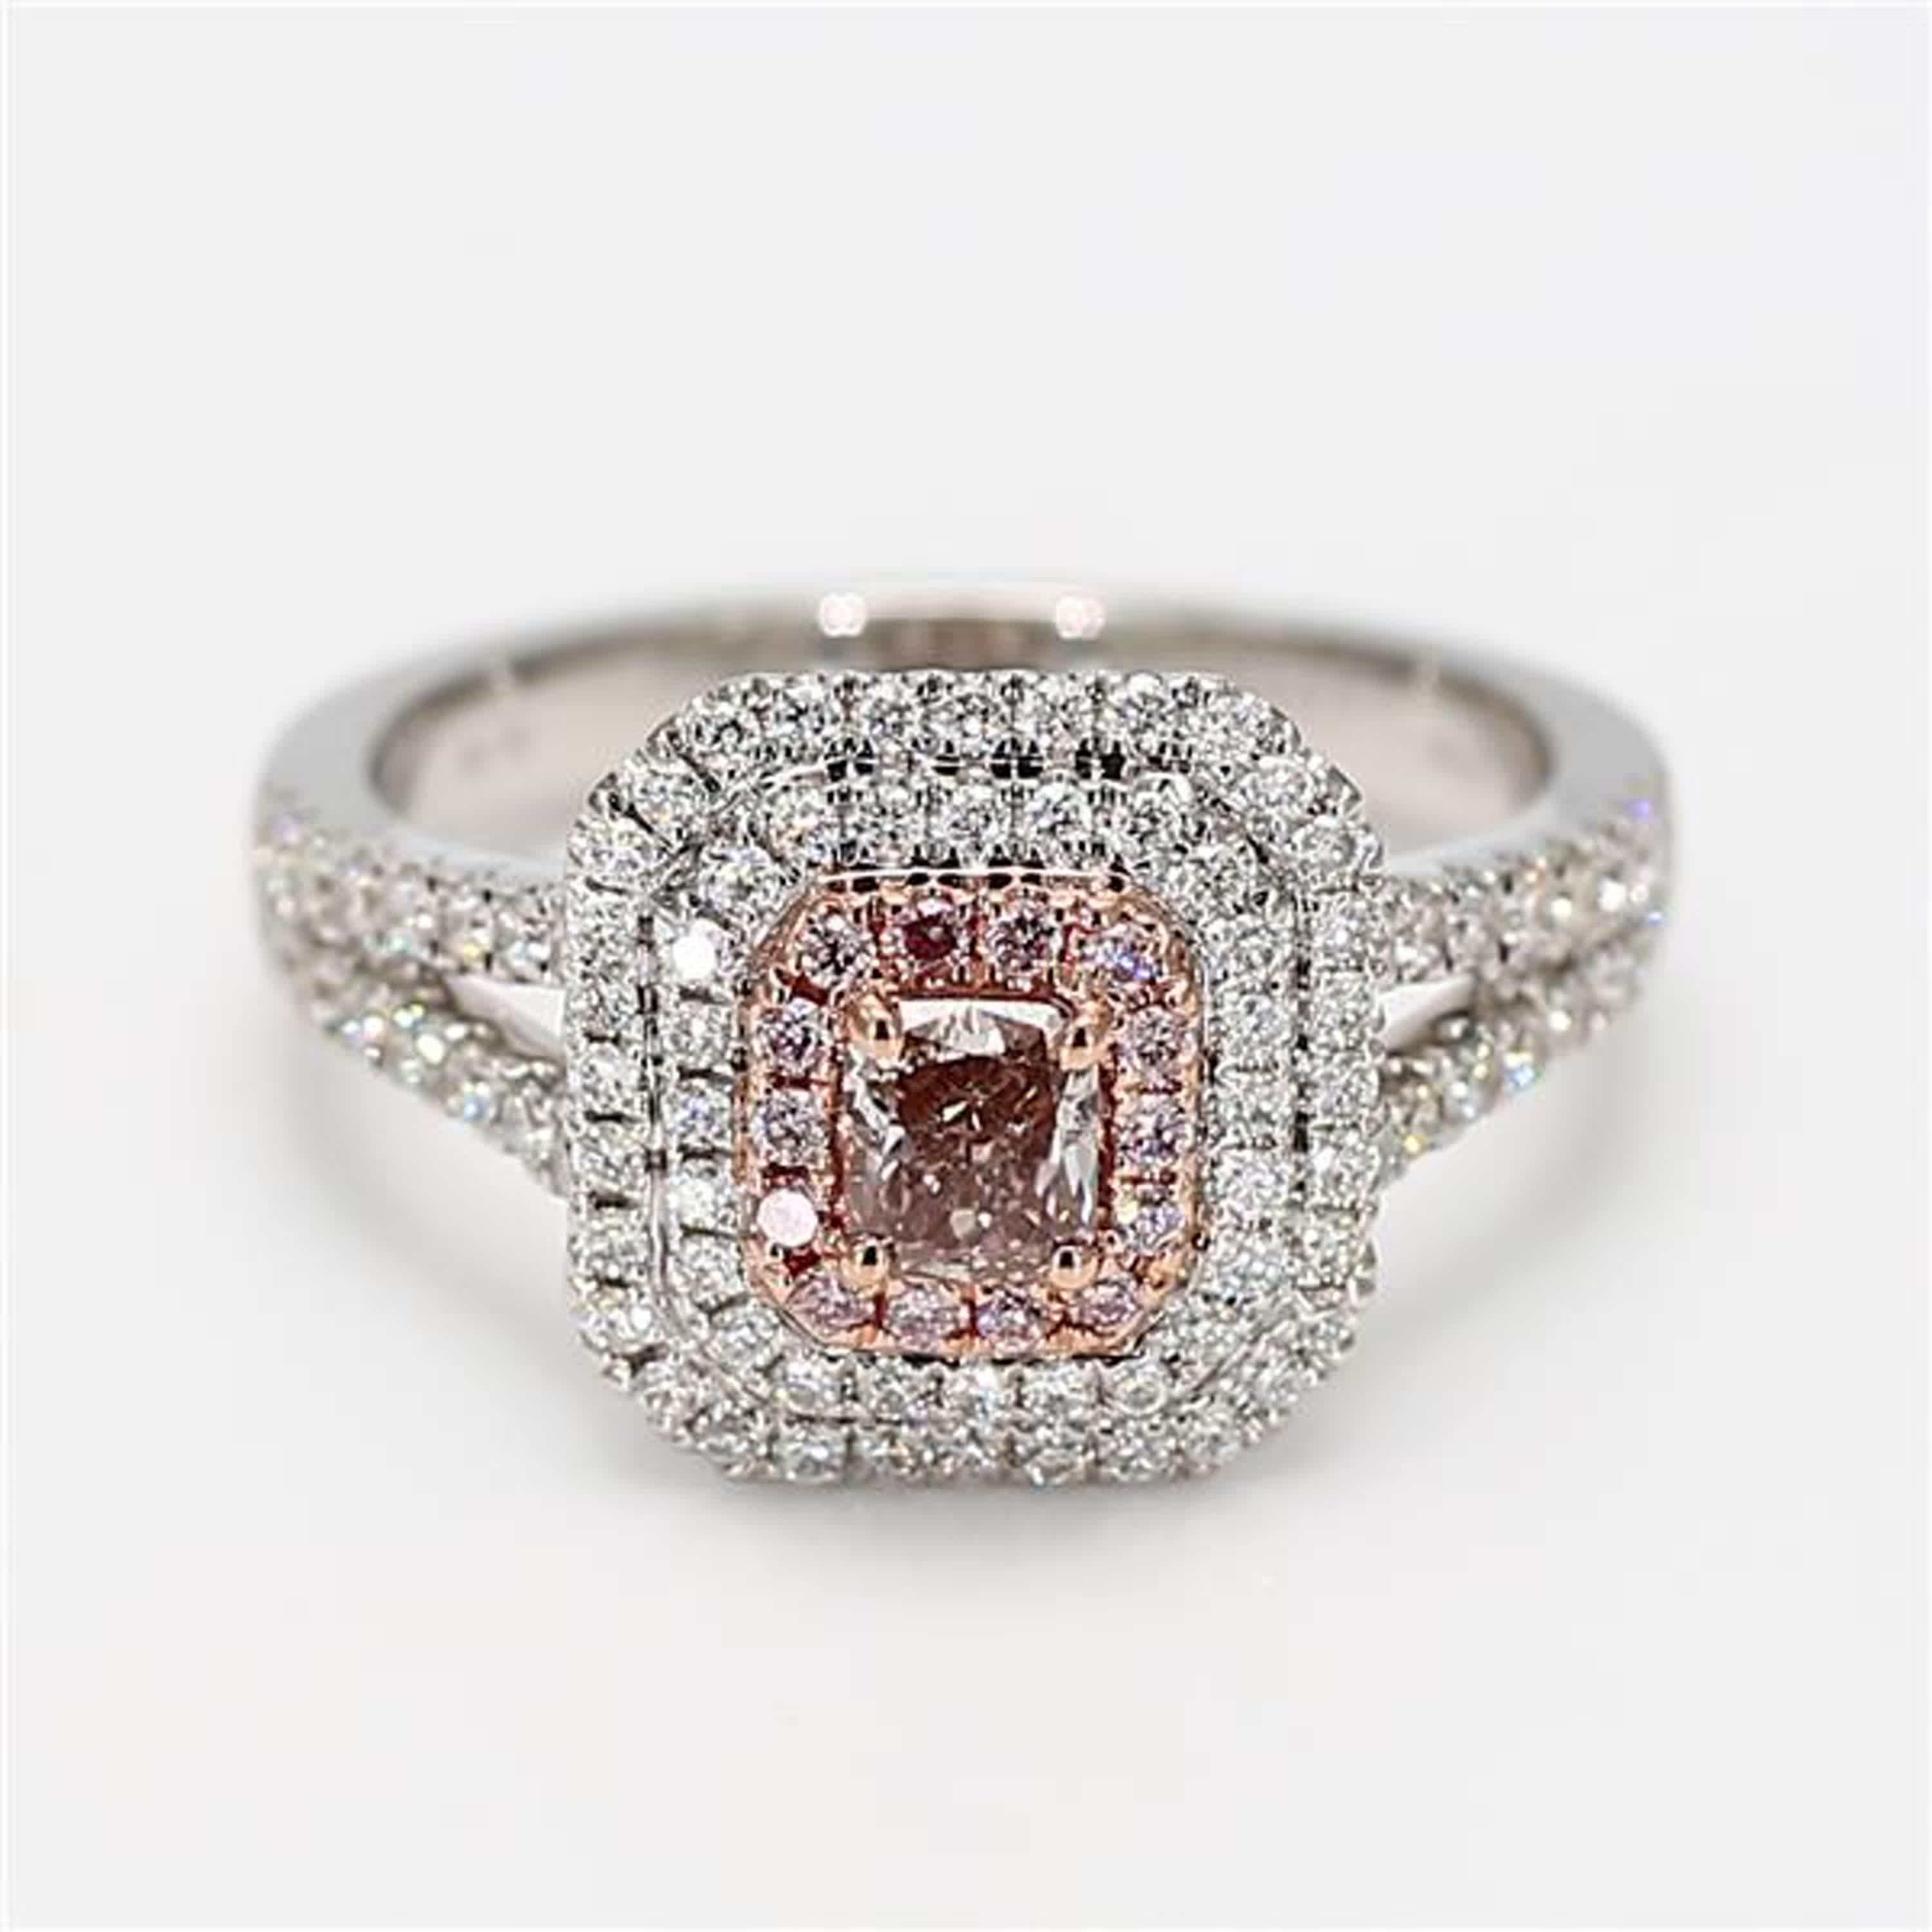 RareGemWorld's classic GIA certified diamond ring. Mounted in a beautiful 18K Rose and White Gold setting with a natural radiant cut pink diamond. The pink diamond is surrounded by round natural pink diamond melee and round natural white diamond